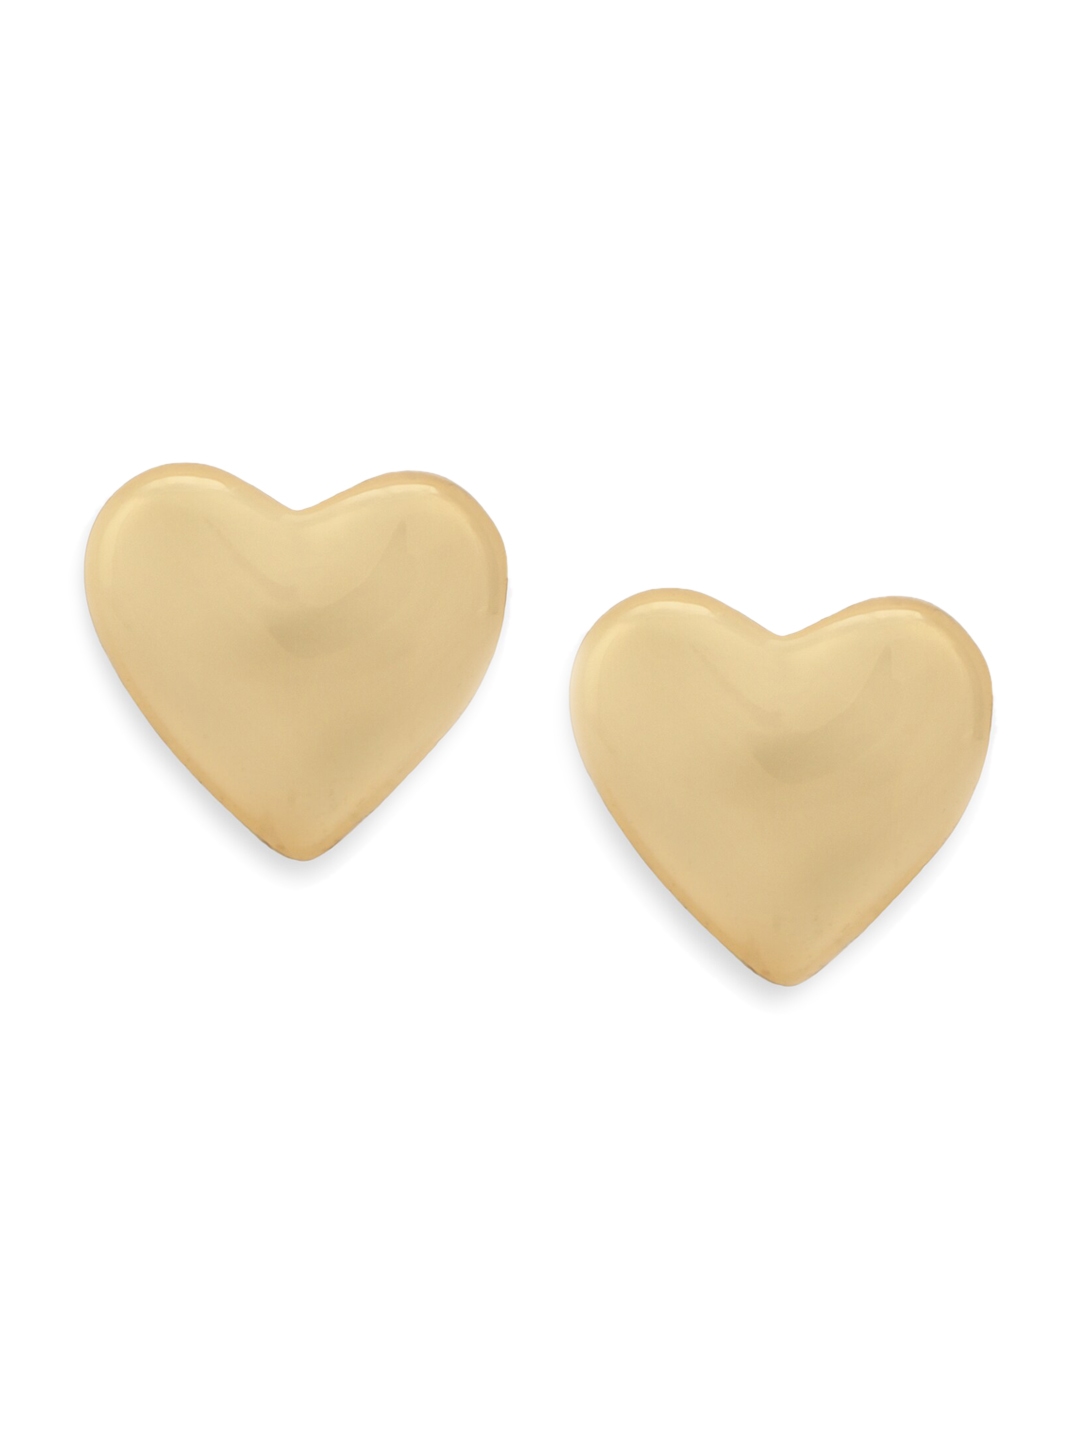 Ted Baker Gold-Plated Heart Shaped Studs Earrings